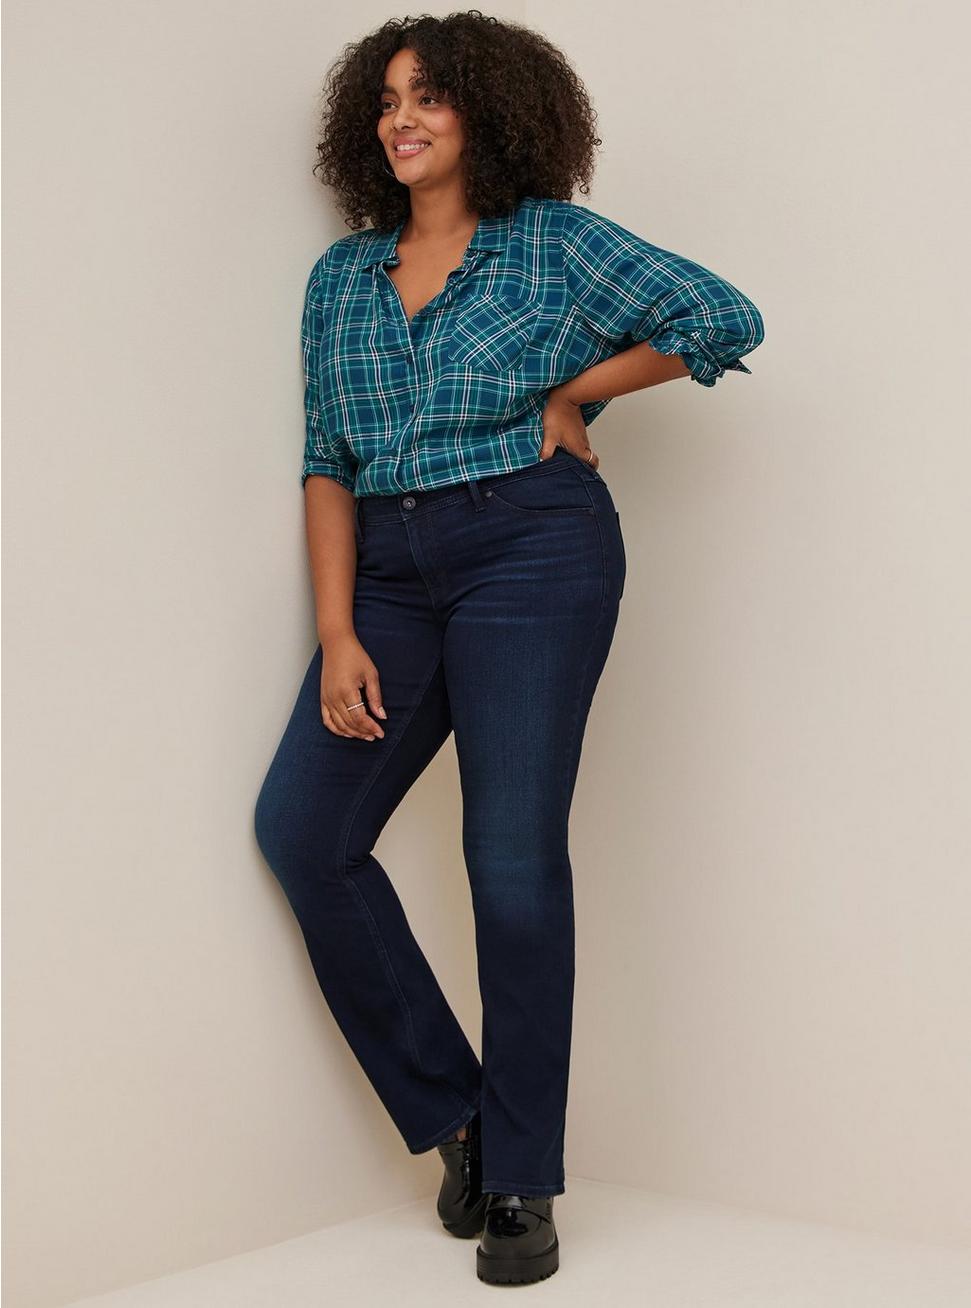 Lizzie Rayon Twill Button-Up Long Sleeve Shirt, PLAID TEAL, alternate